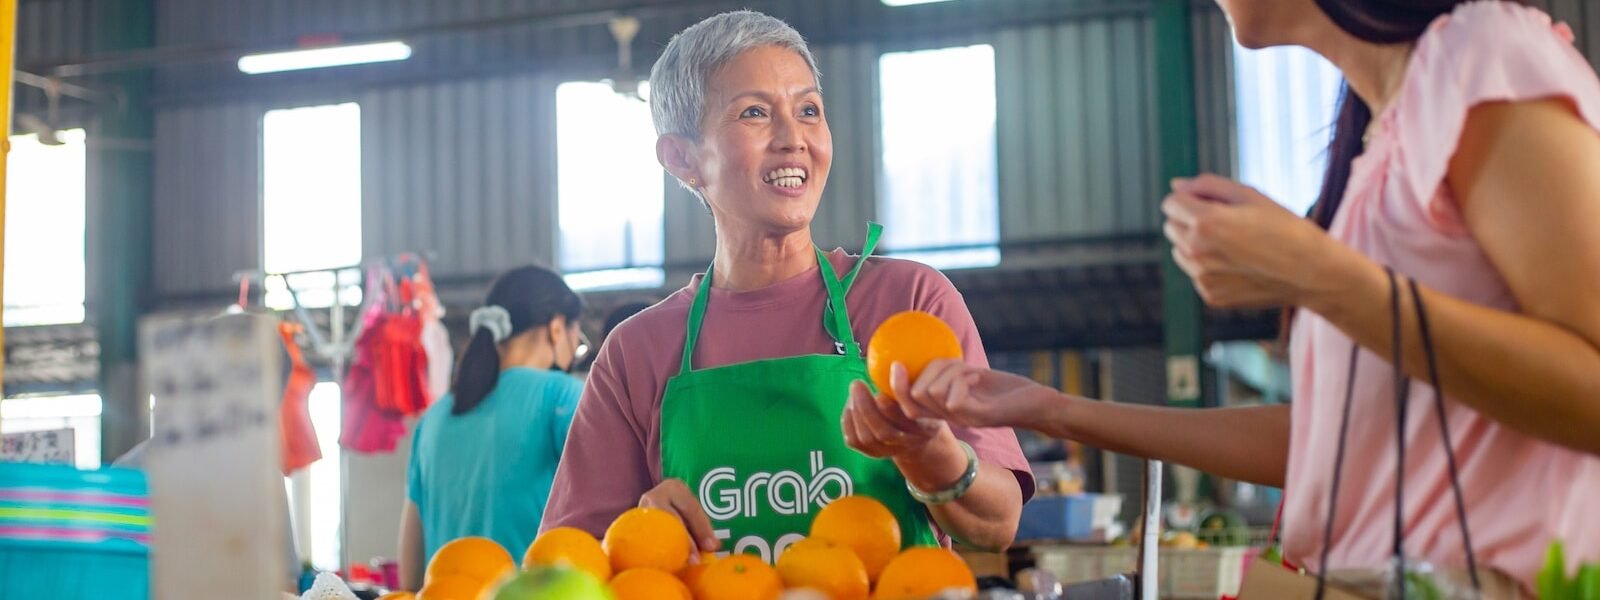 a woman in a green apron standing in front of a table filled with oranges